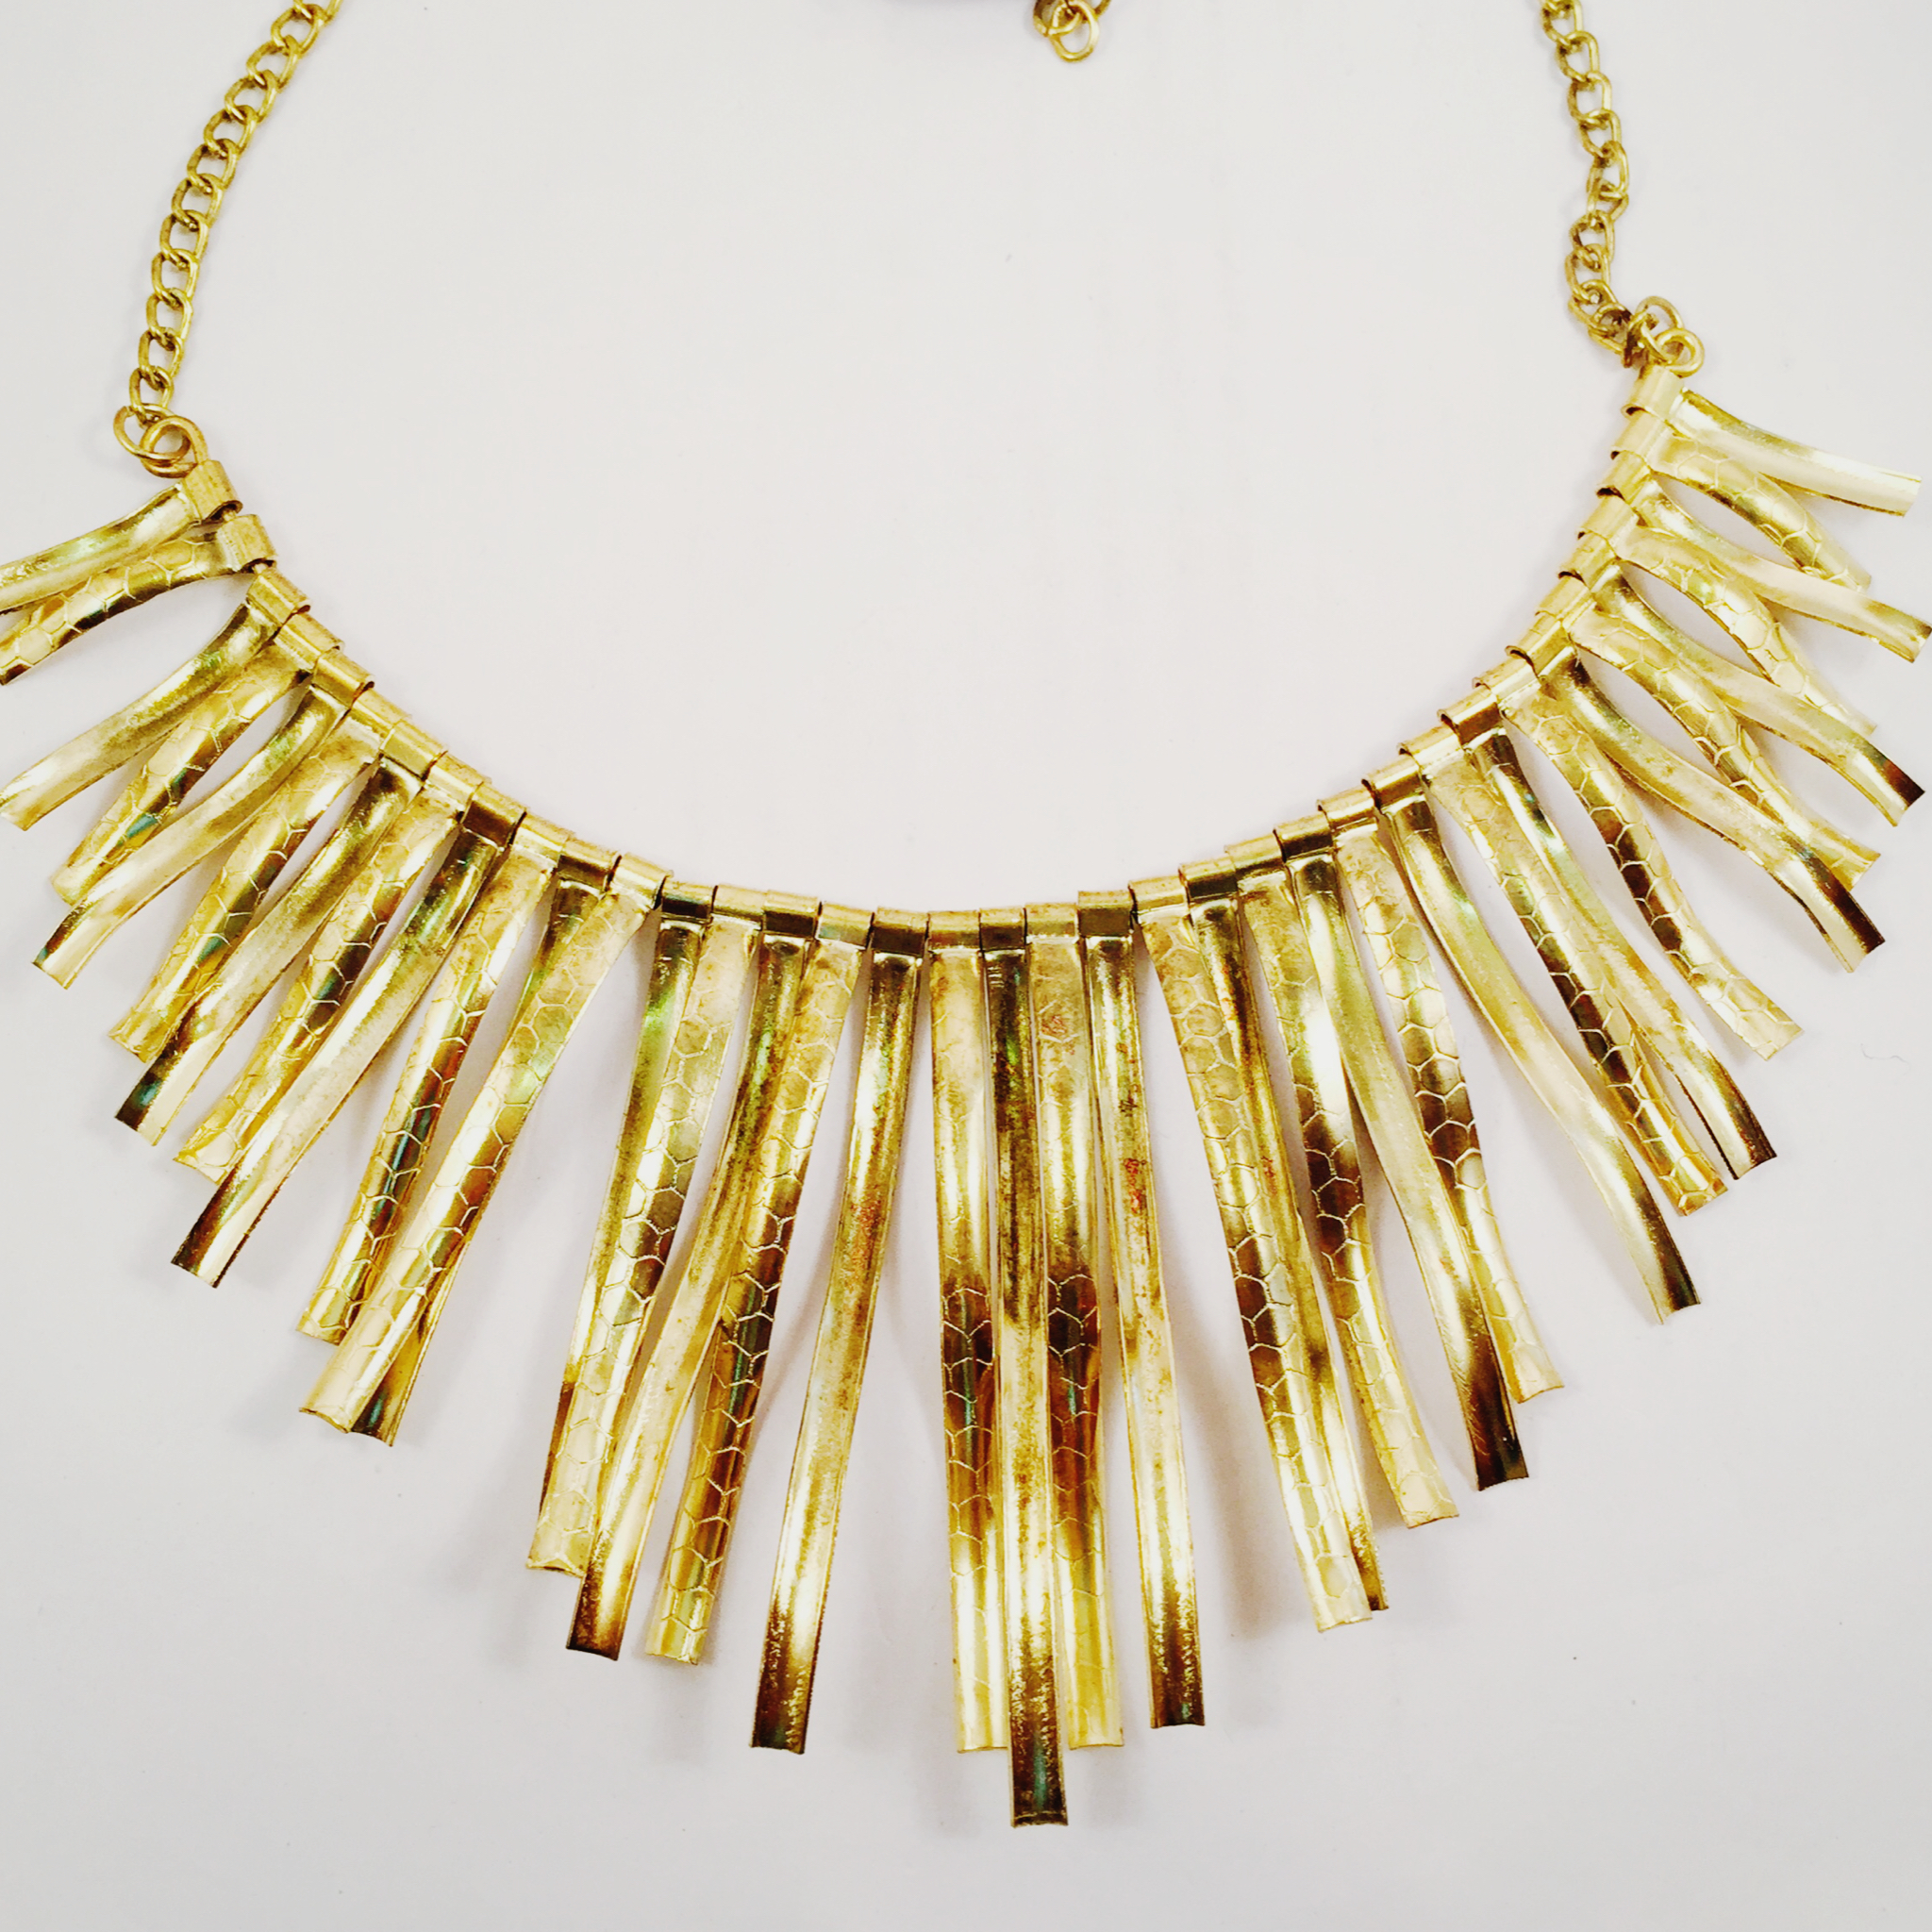 Costume jewelley statement necklace